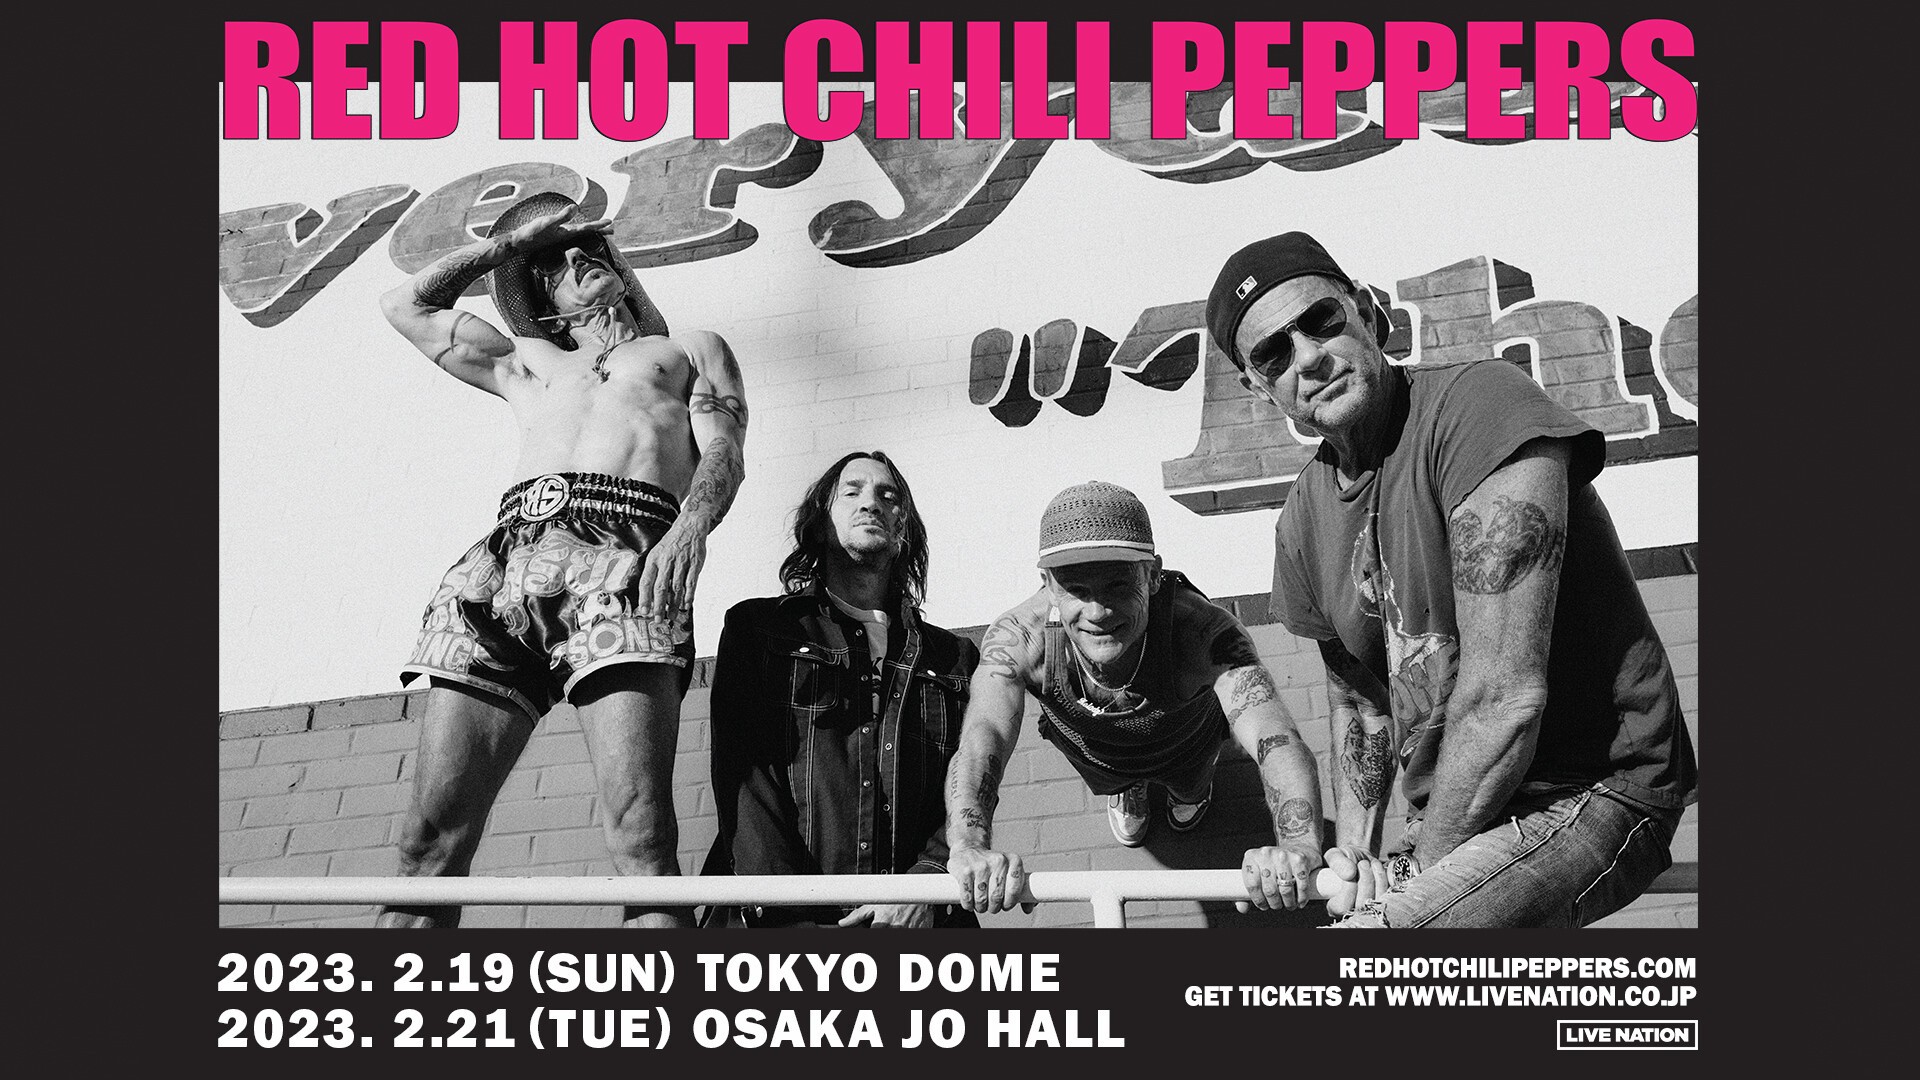 iFLYER: ロック・シーン最強のバンドRed Hot Chili Peppers（レッド 